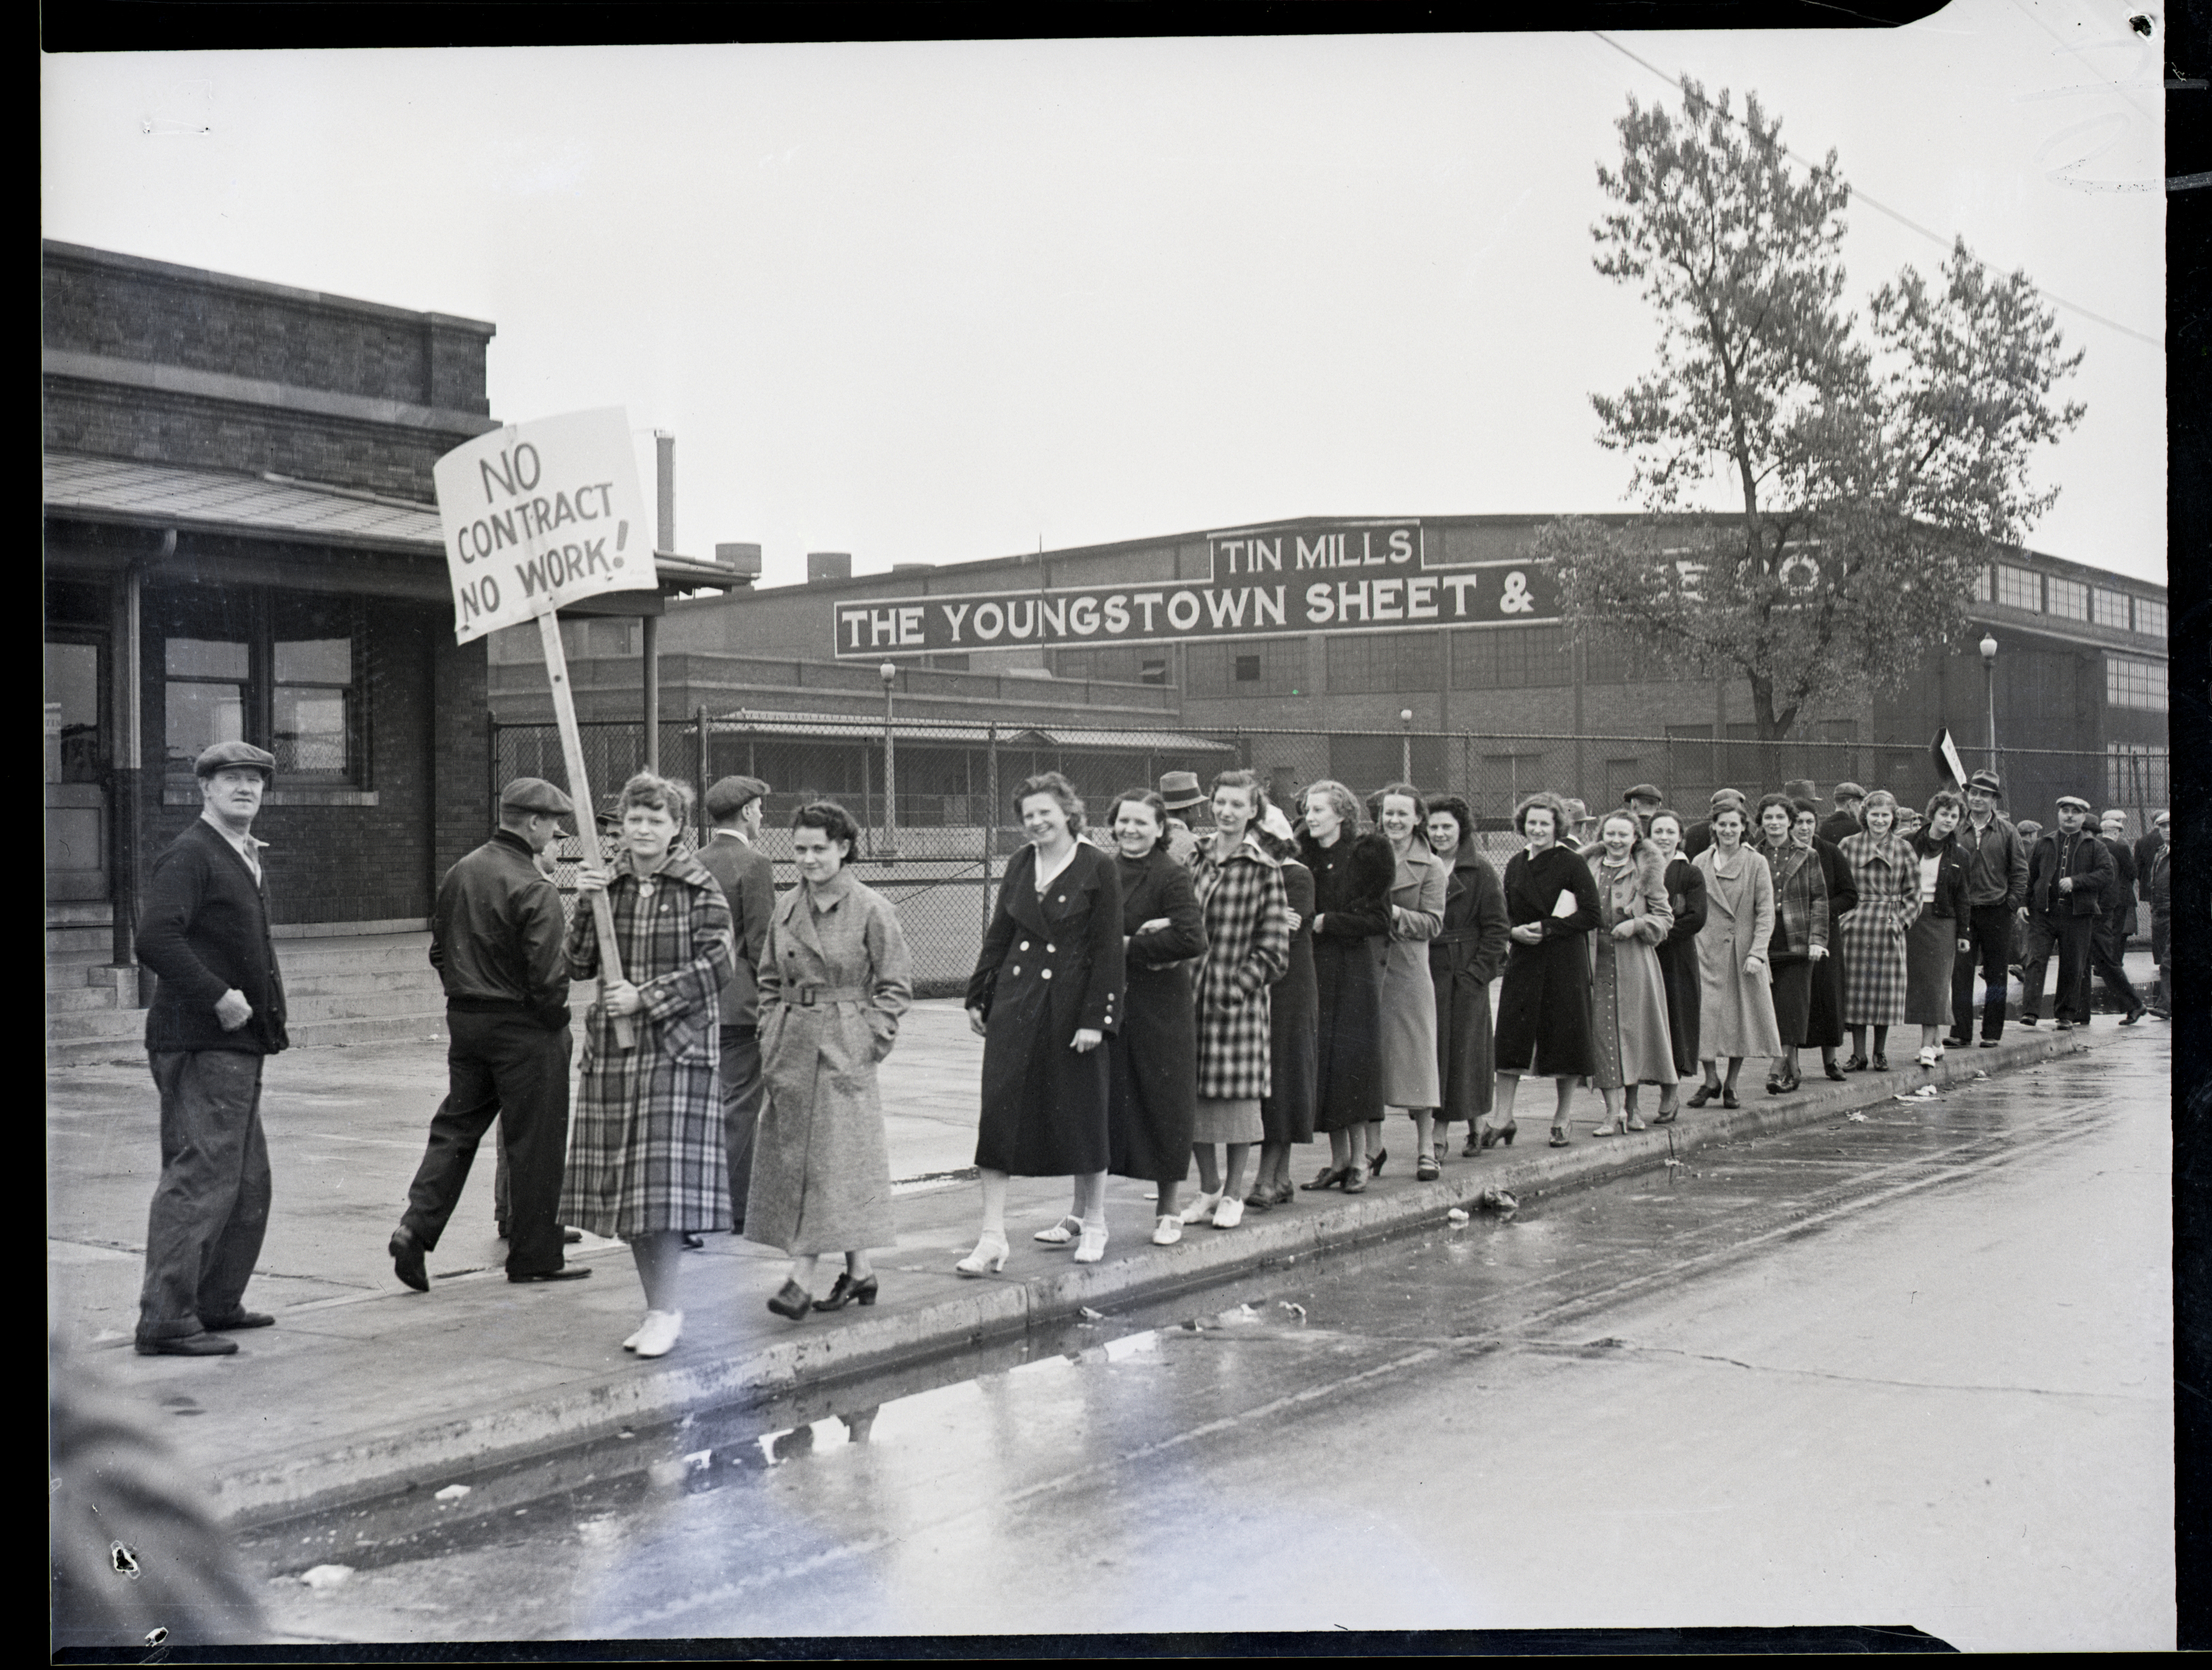 Wives and sympathizers leading the picket line at Youngstown Sheet and Tube Company in 1937